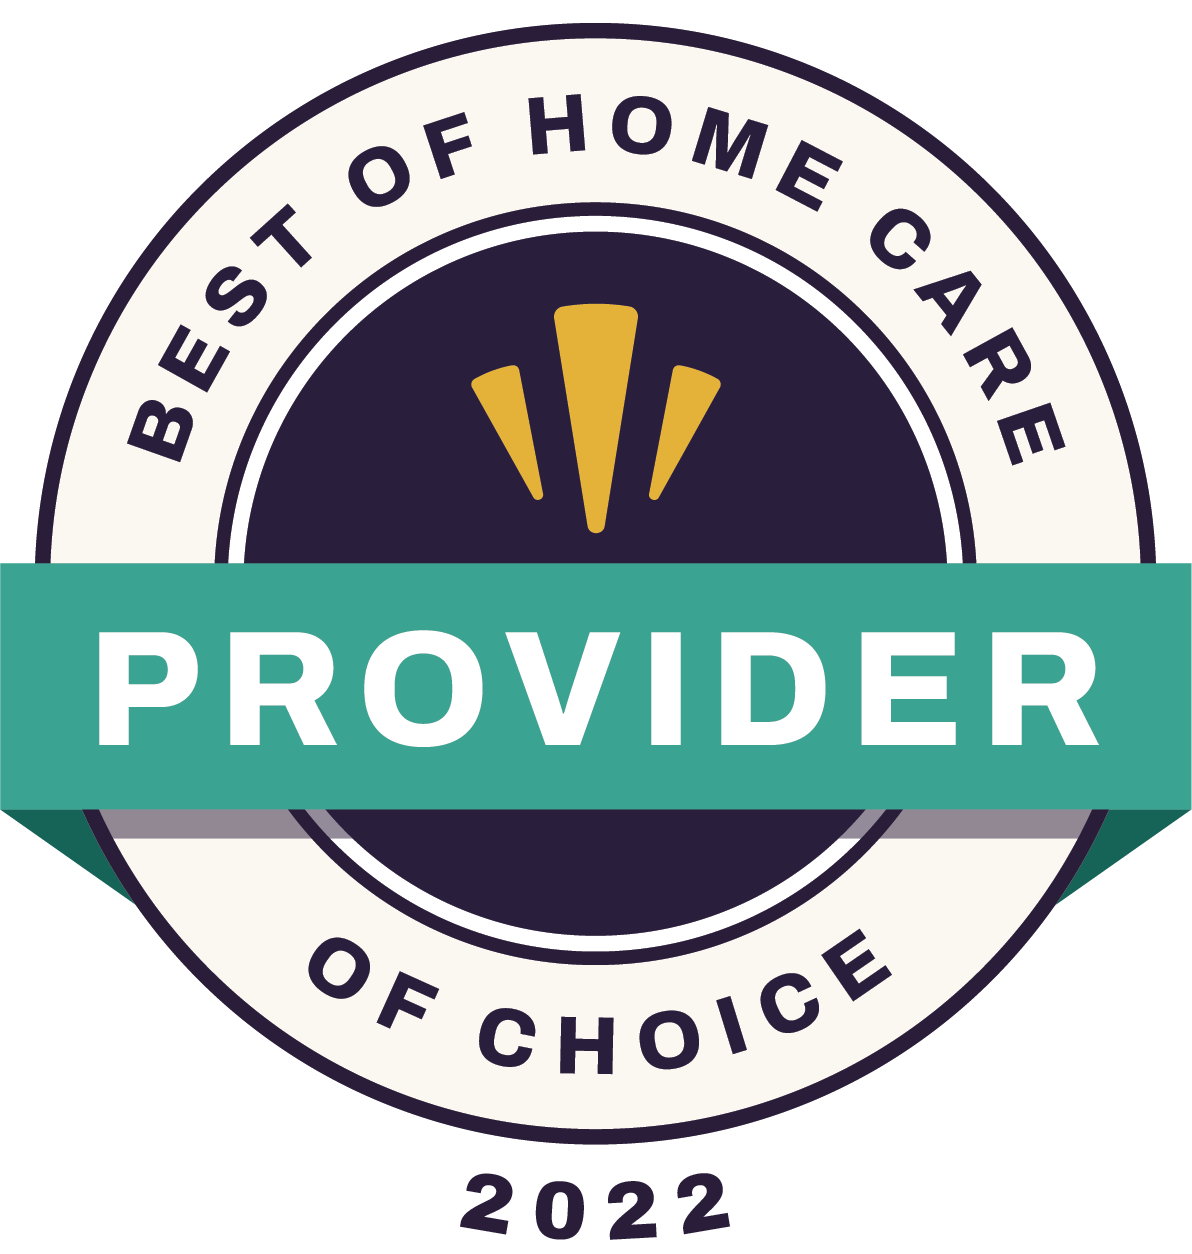 Best of Home Care Provider of Choice 2022